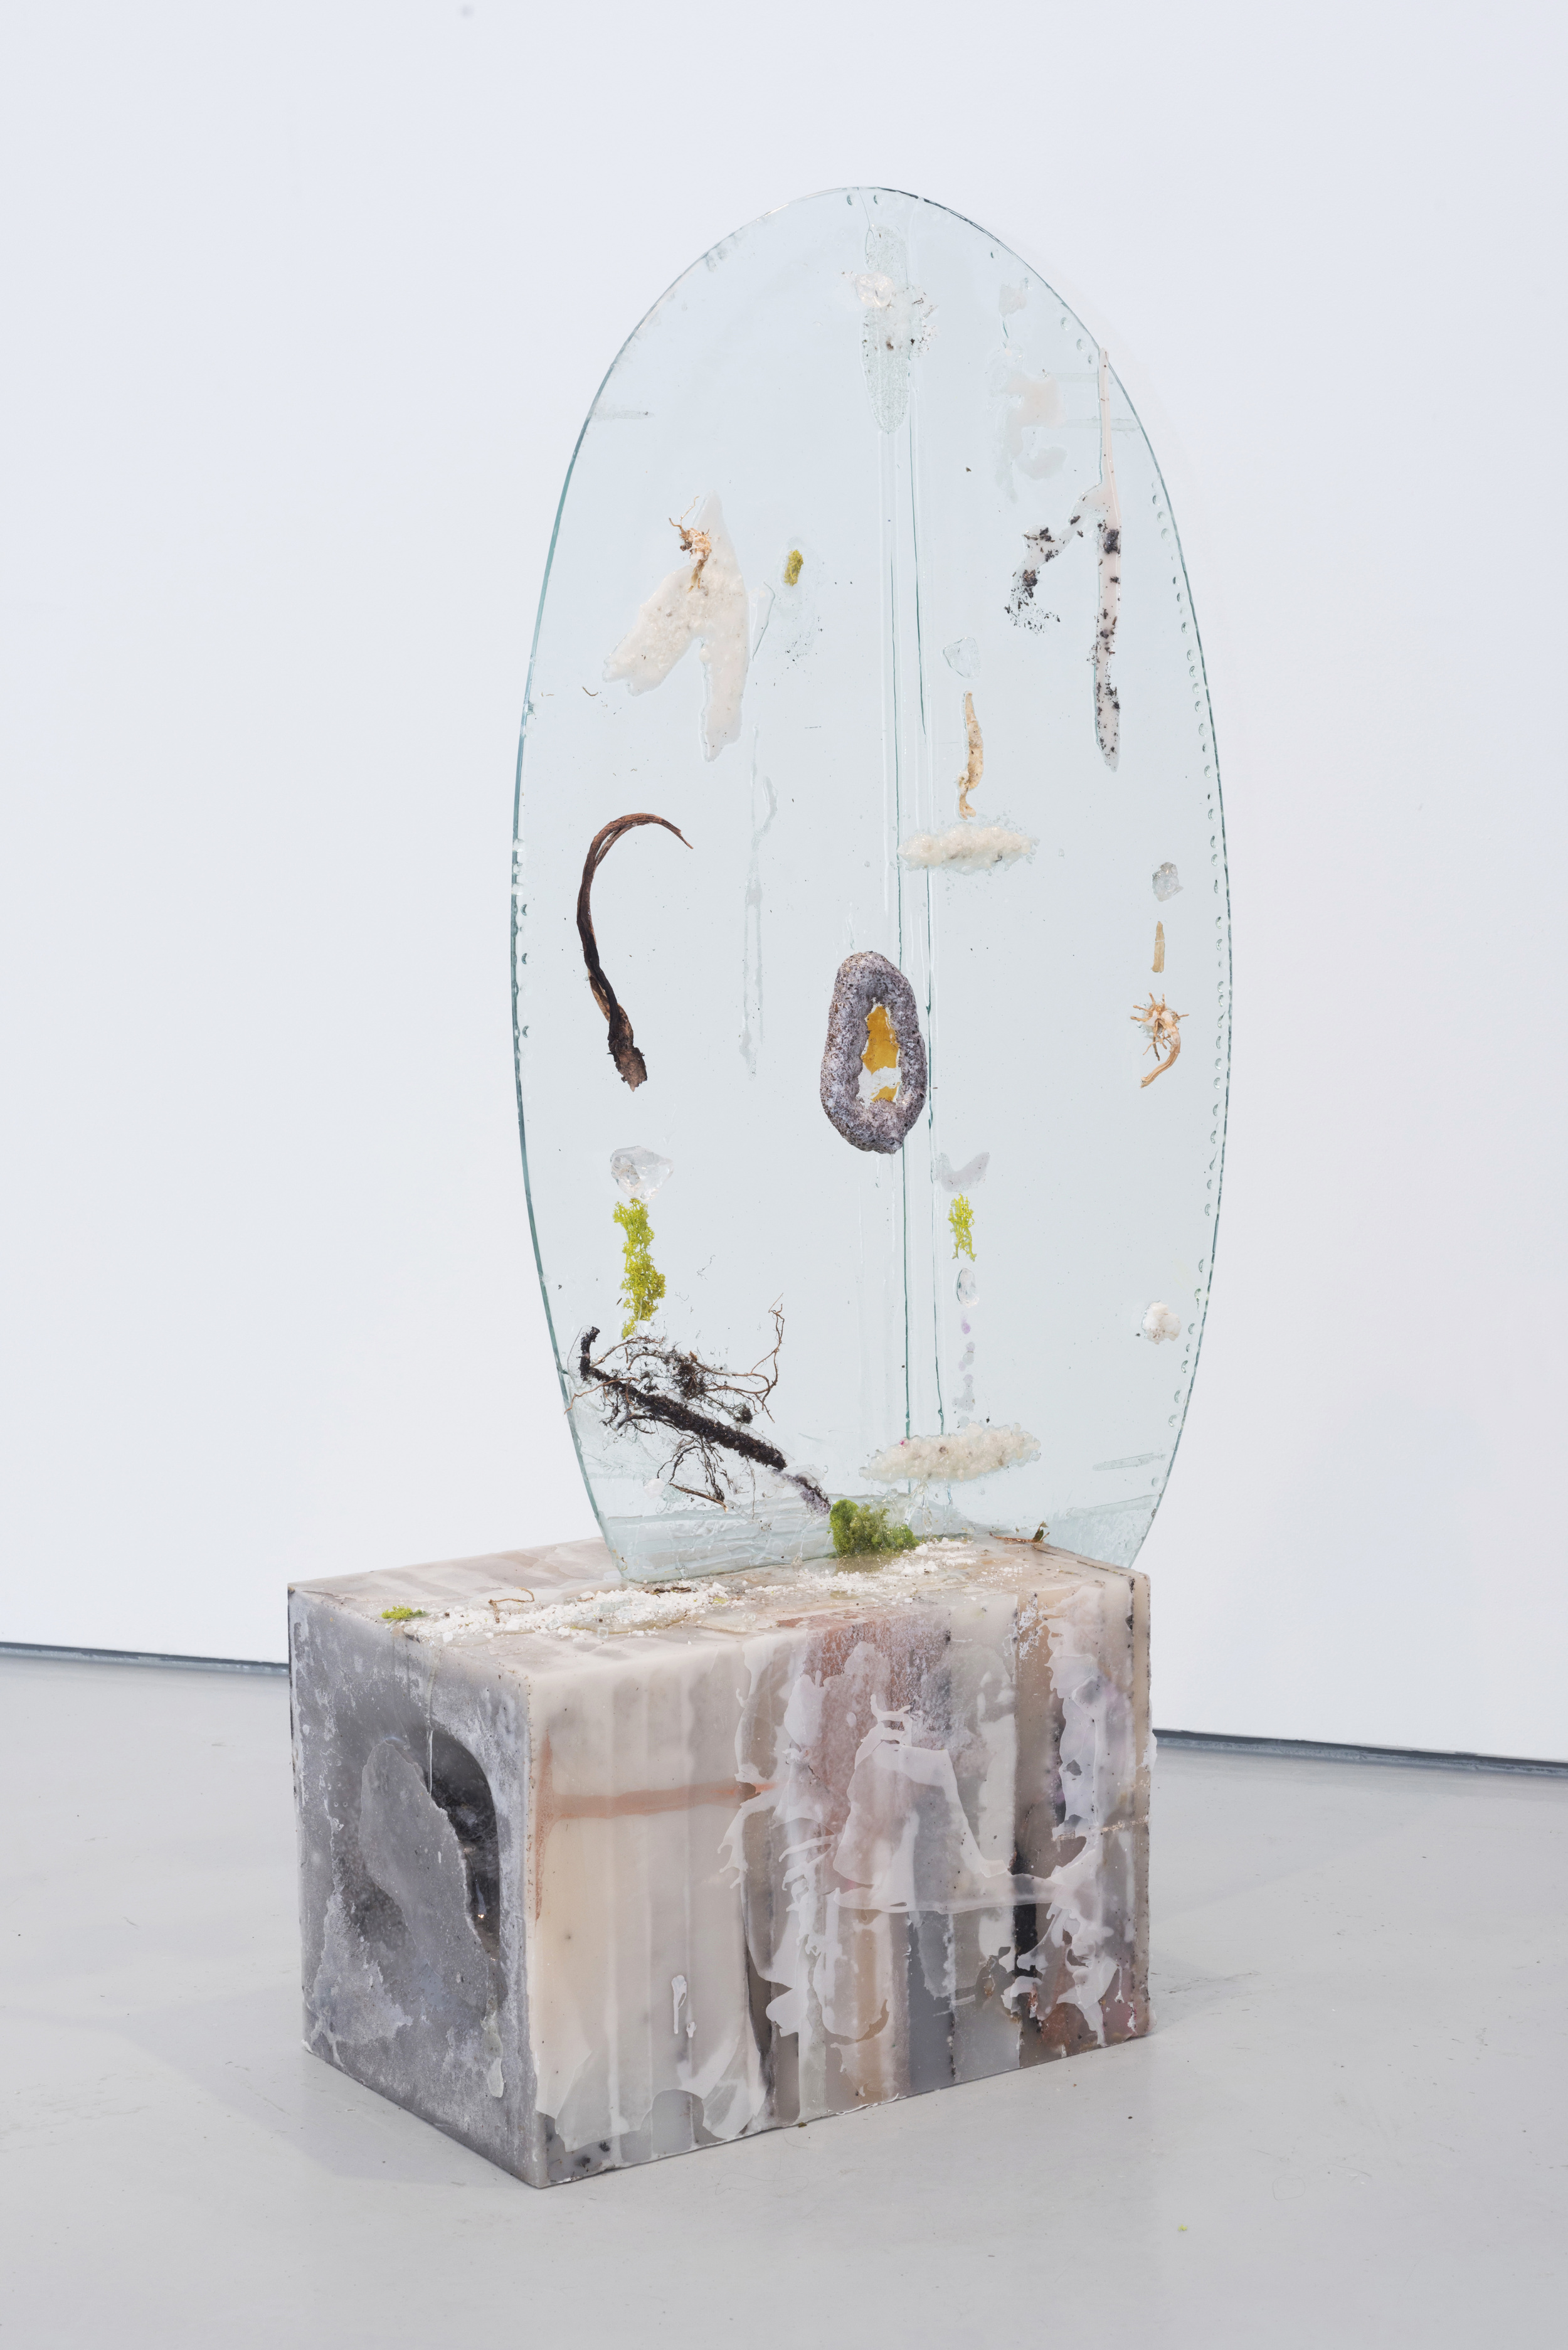  Ellipse with Nitrogen Fixers and Snake Plant Buds, 2013-2014. Glass, wax, resin, plant materials, rock salt, 49 x 26 x 12 3/4 inches&nbsp; 